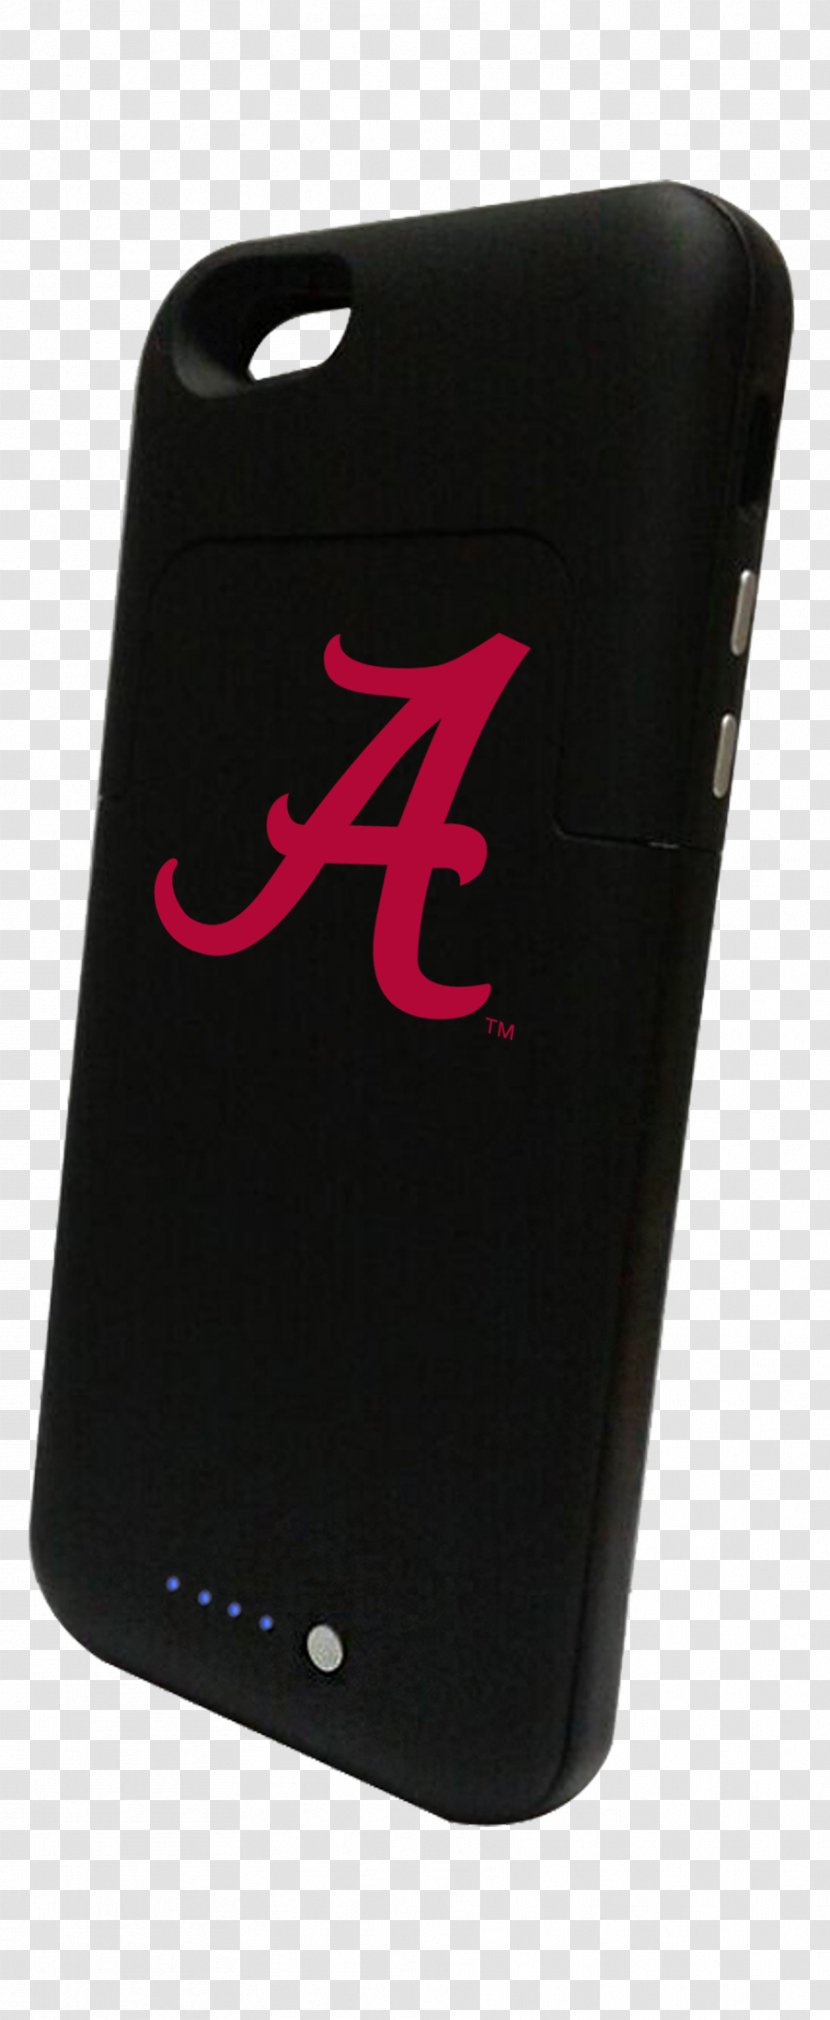 University Of Alabama Mobile Phones Phone Accessories - Telephony - Case Transparent PNG